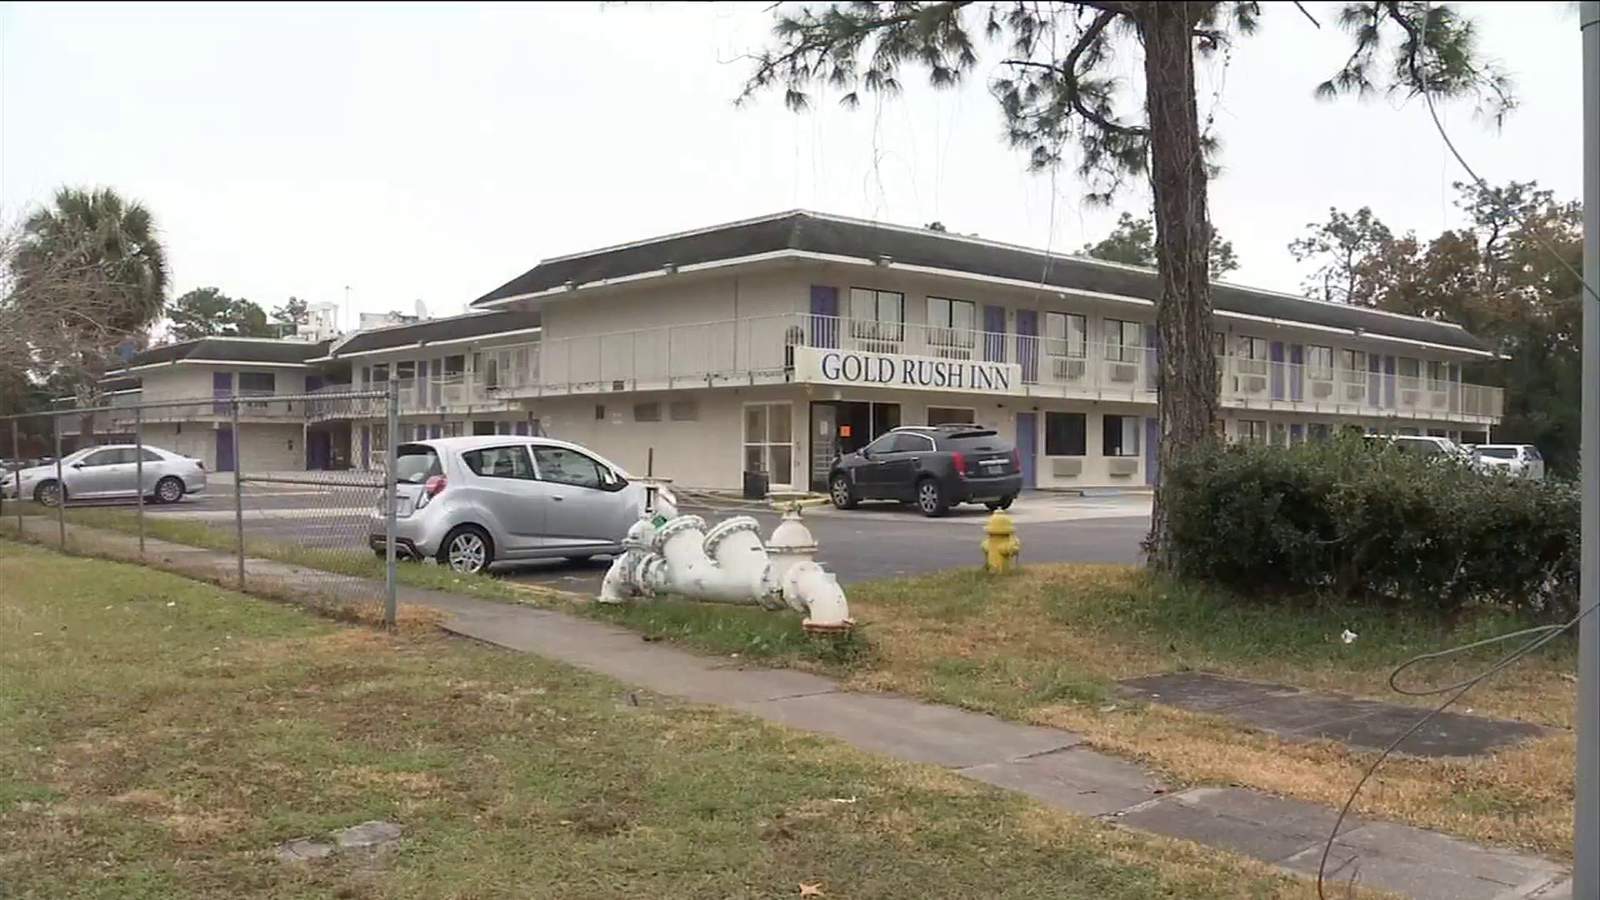 State shuts down troubled Jacksonville motel